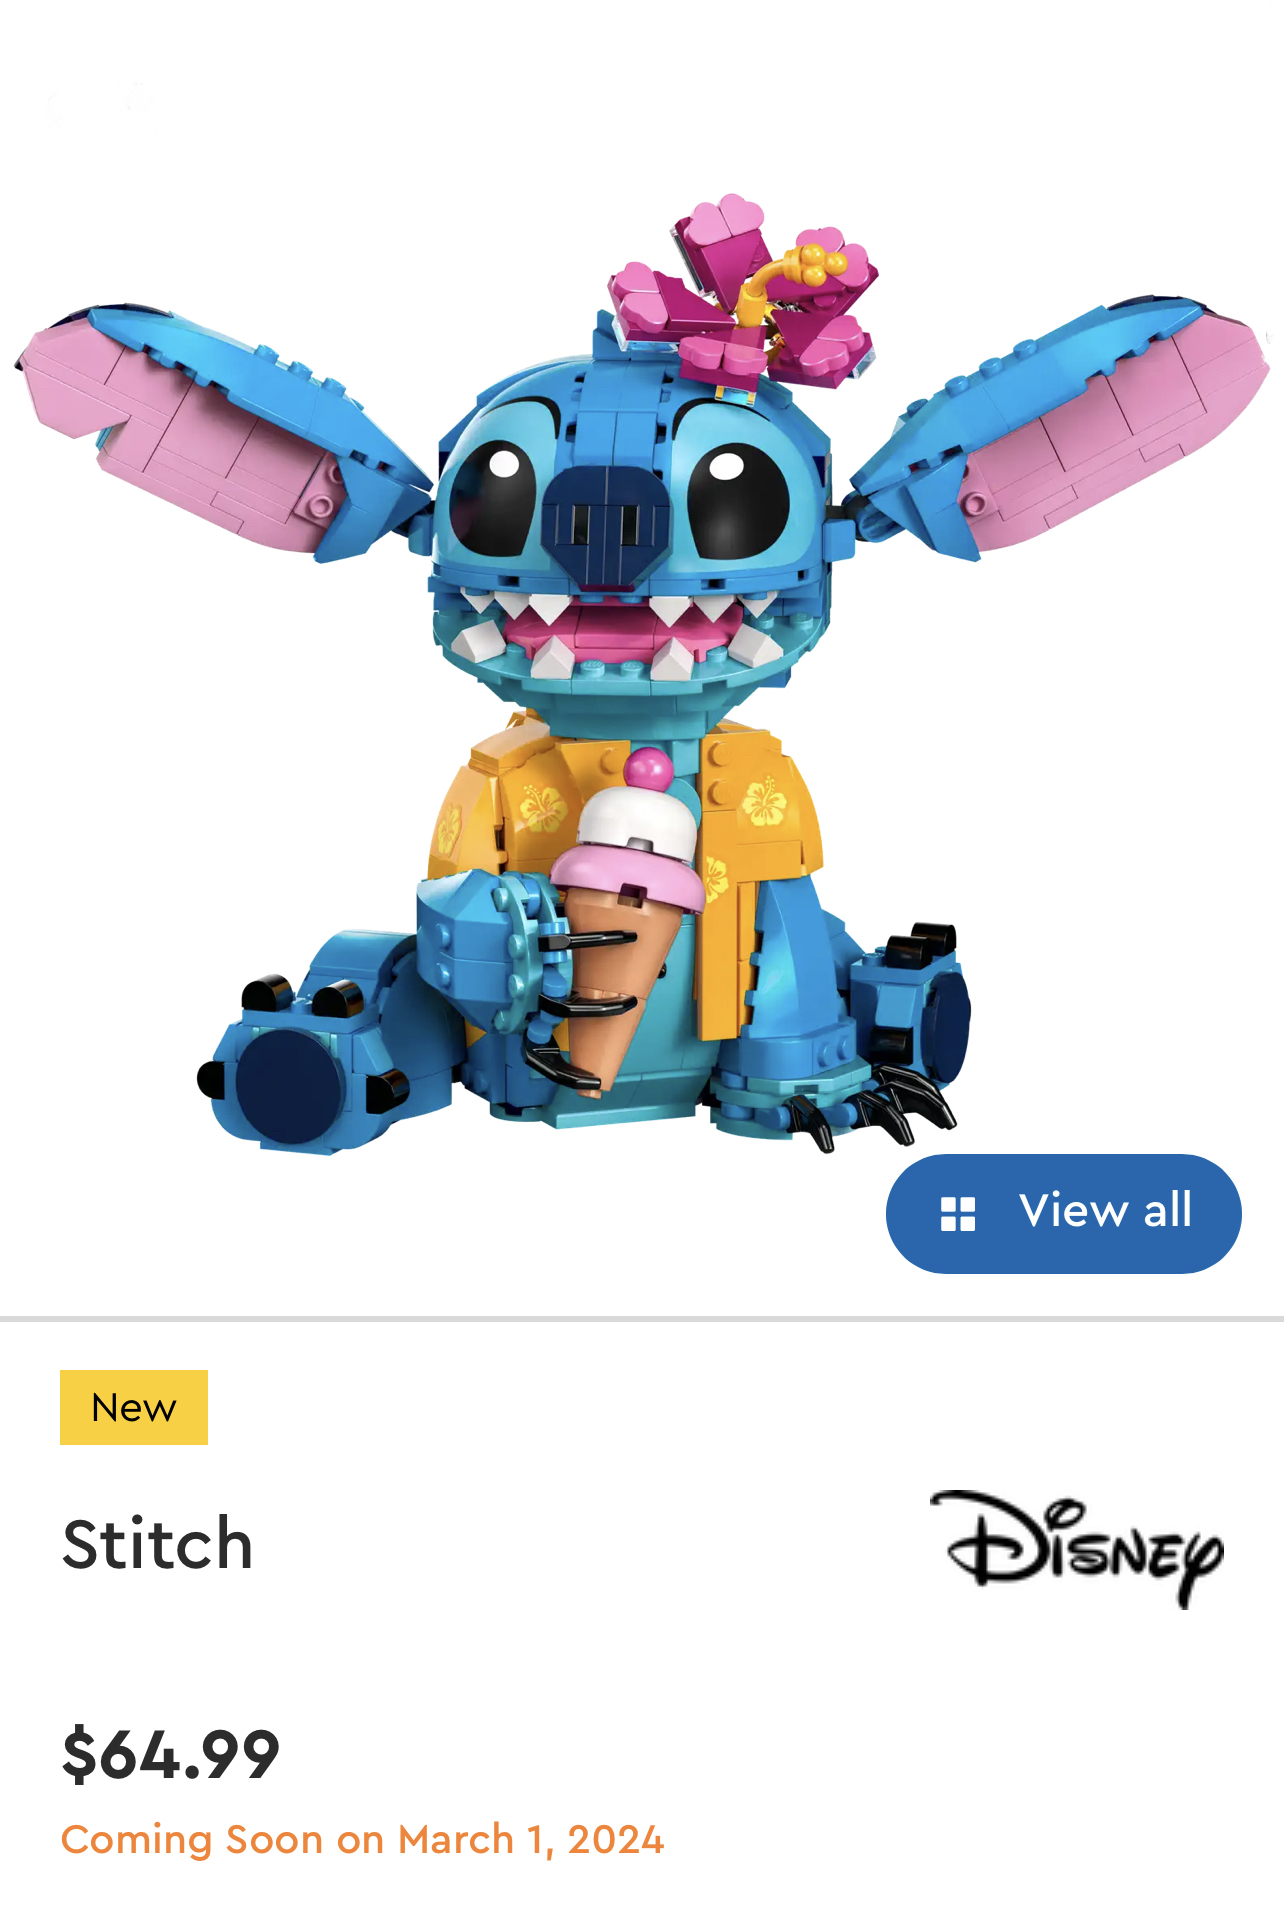 Say 'Aloha' to the NEW Lego Stitch Set Coming Soon 